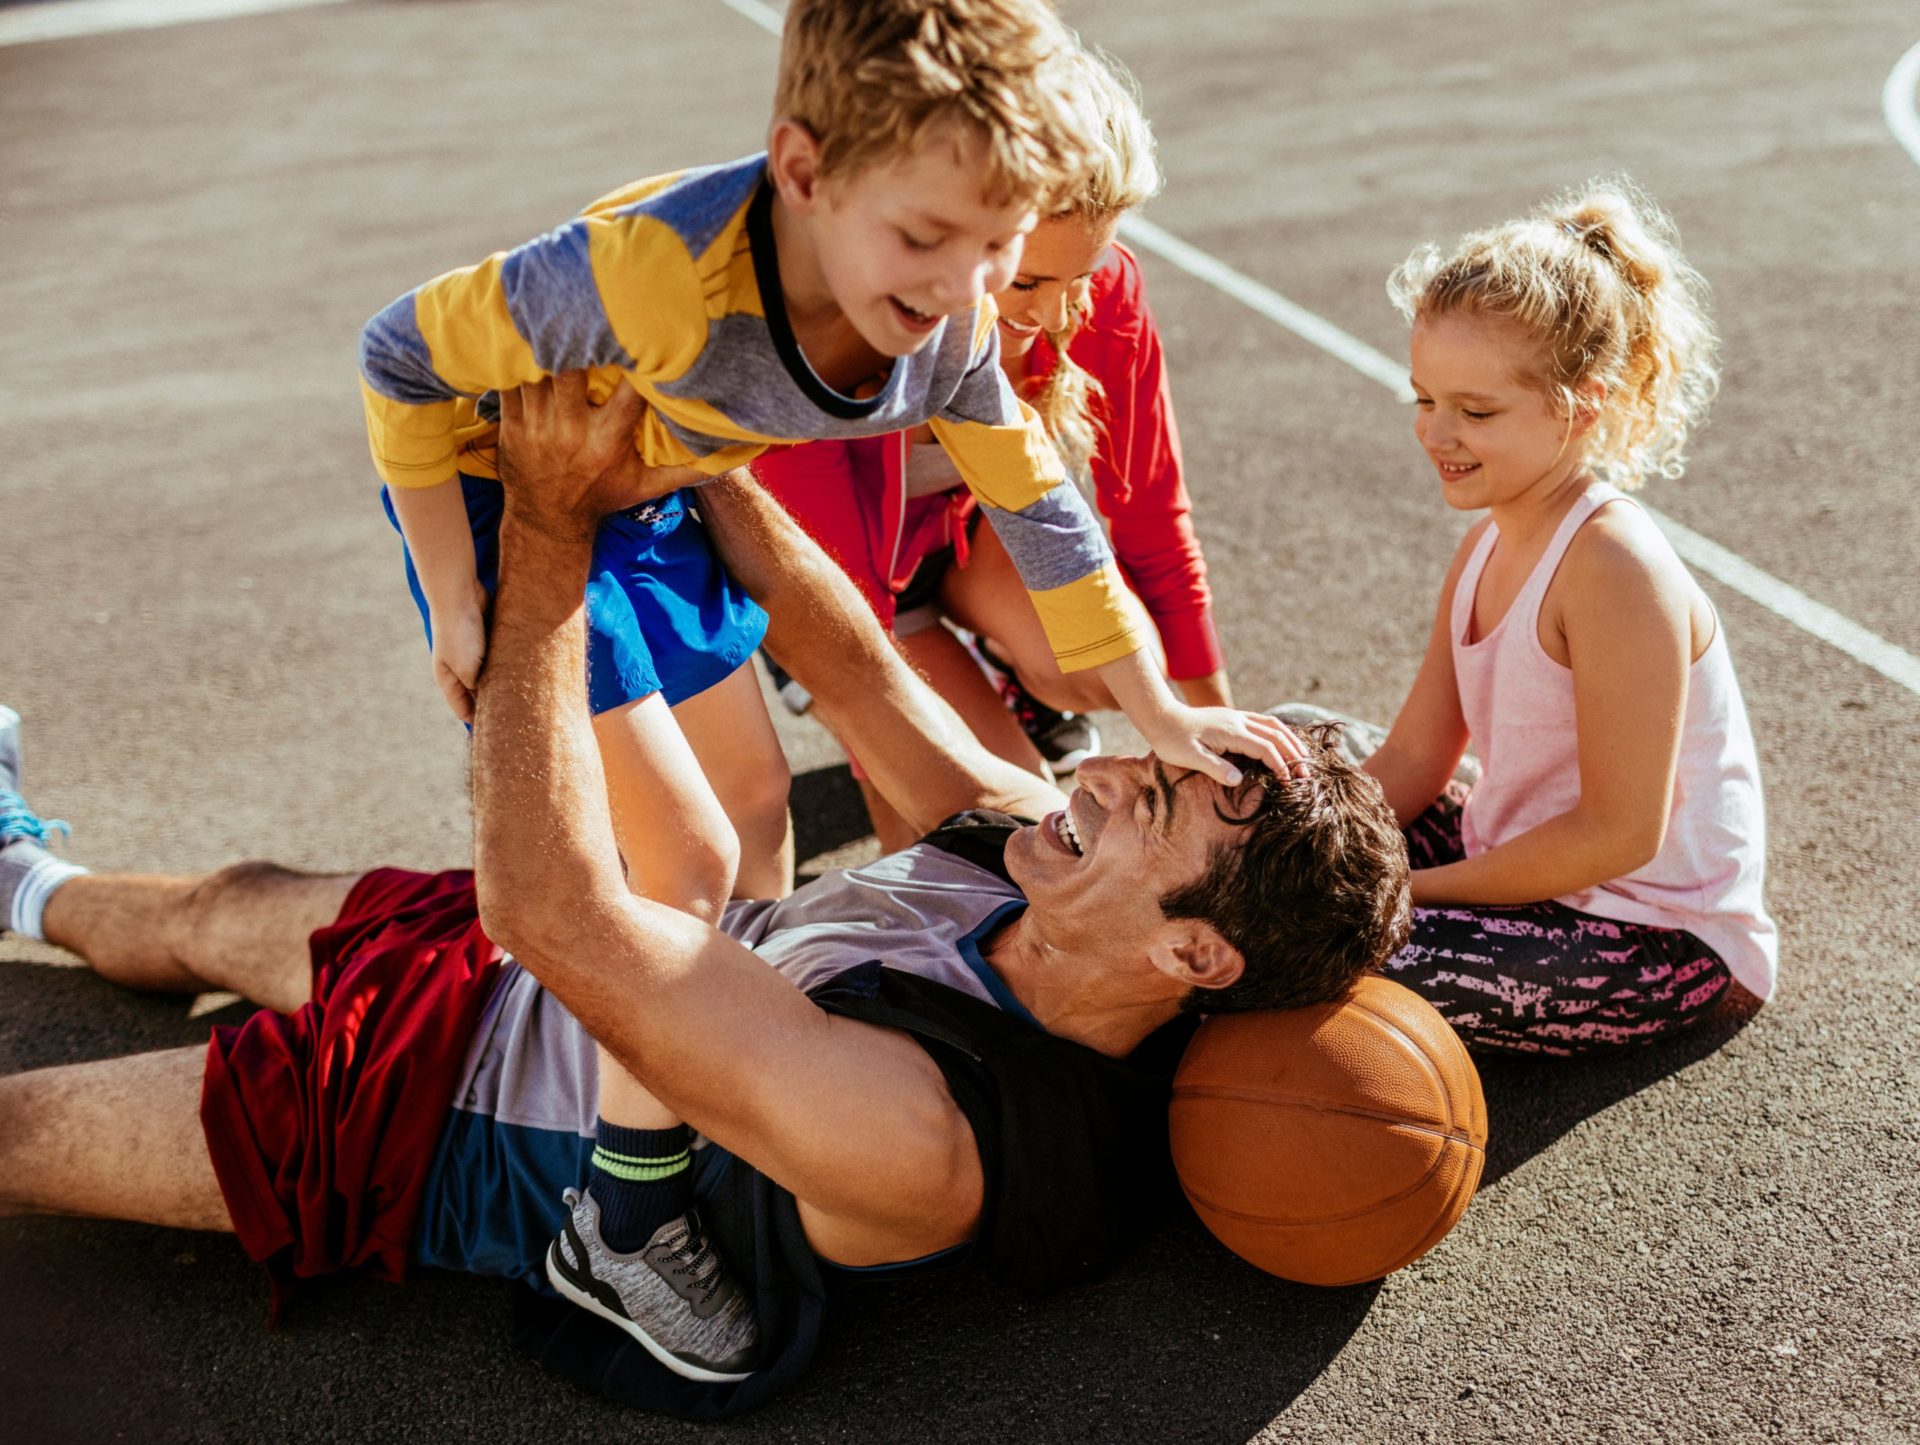 A family of 4 playing basketball together